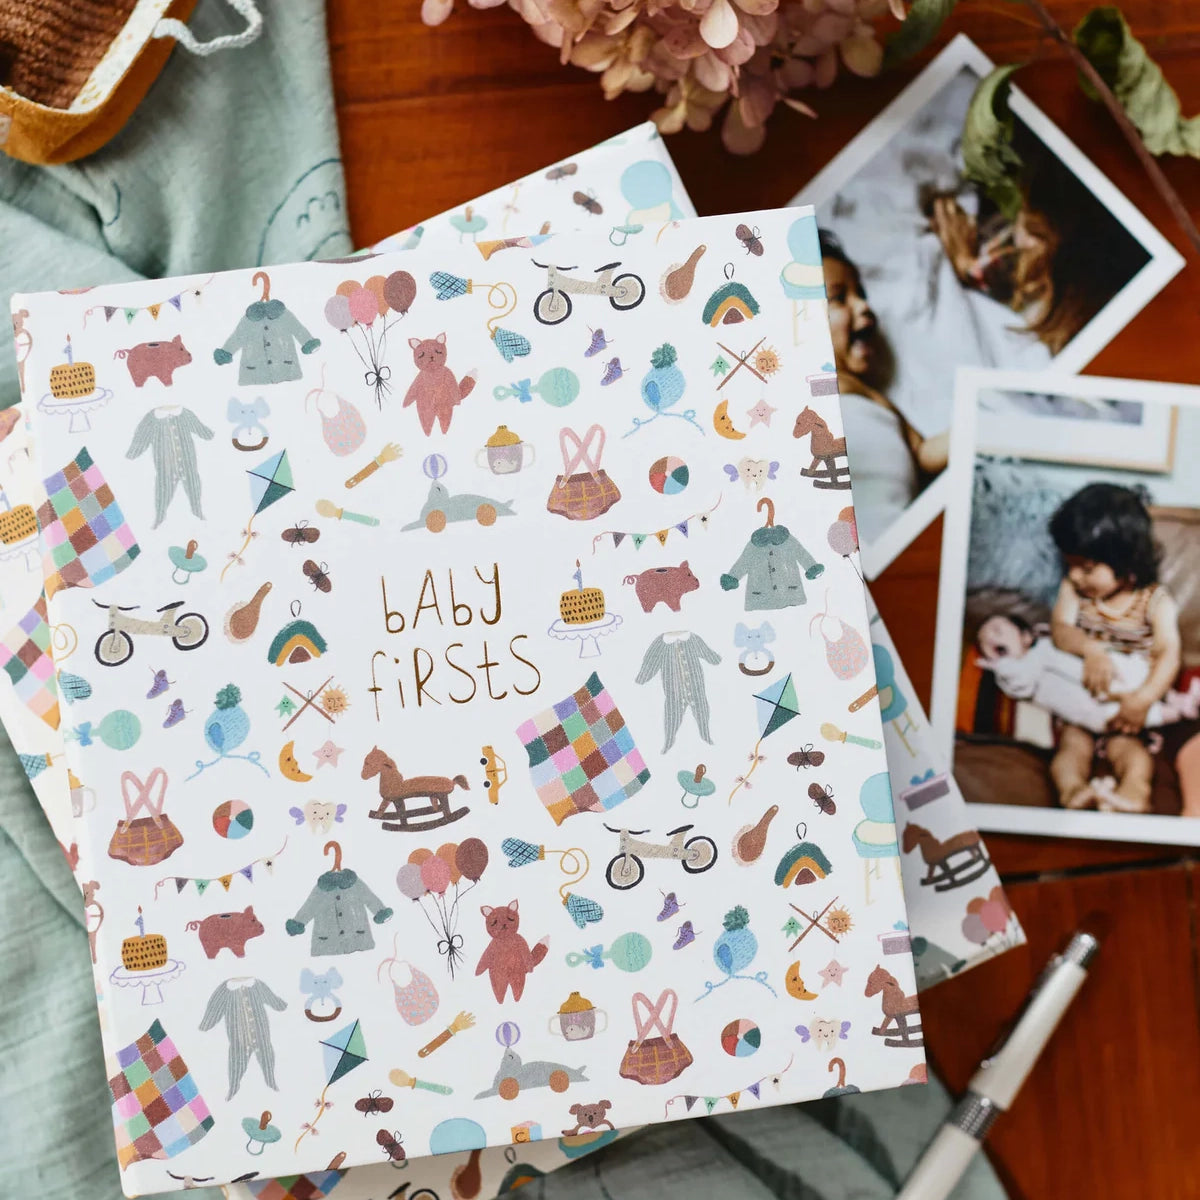 Baby Firsts Journal